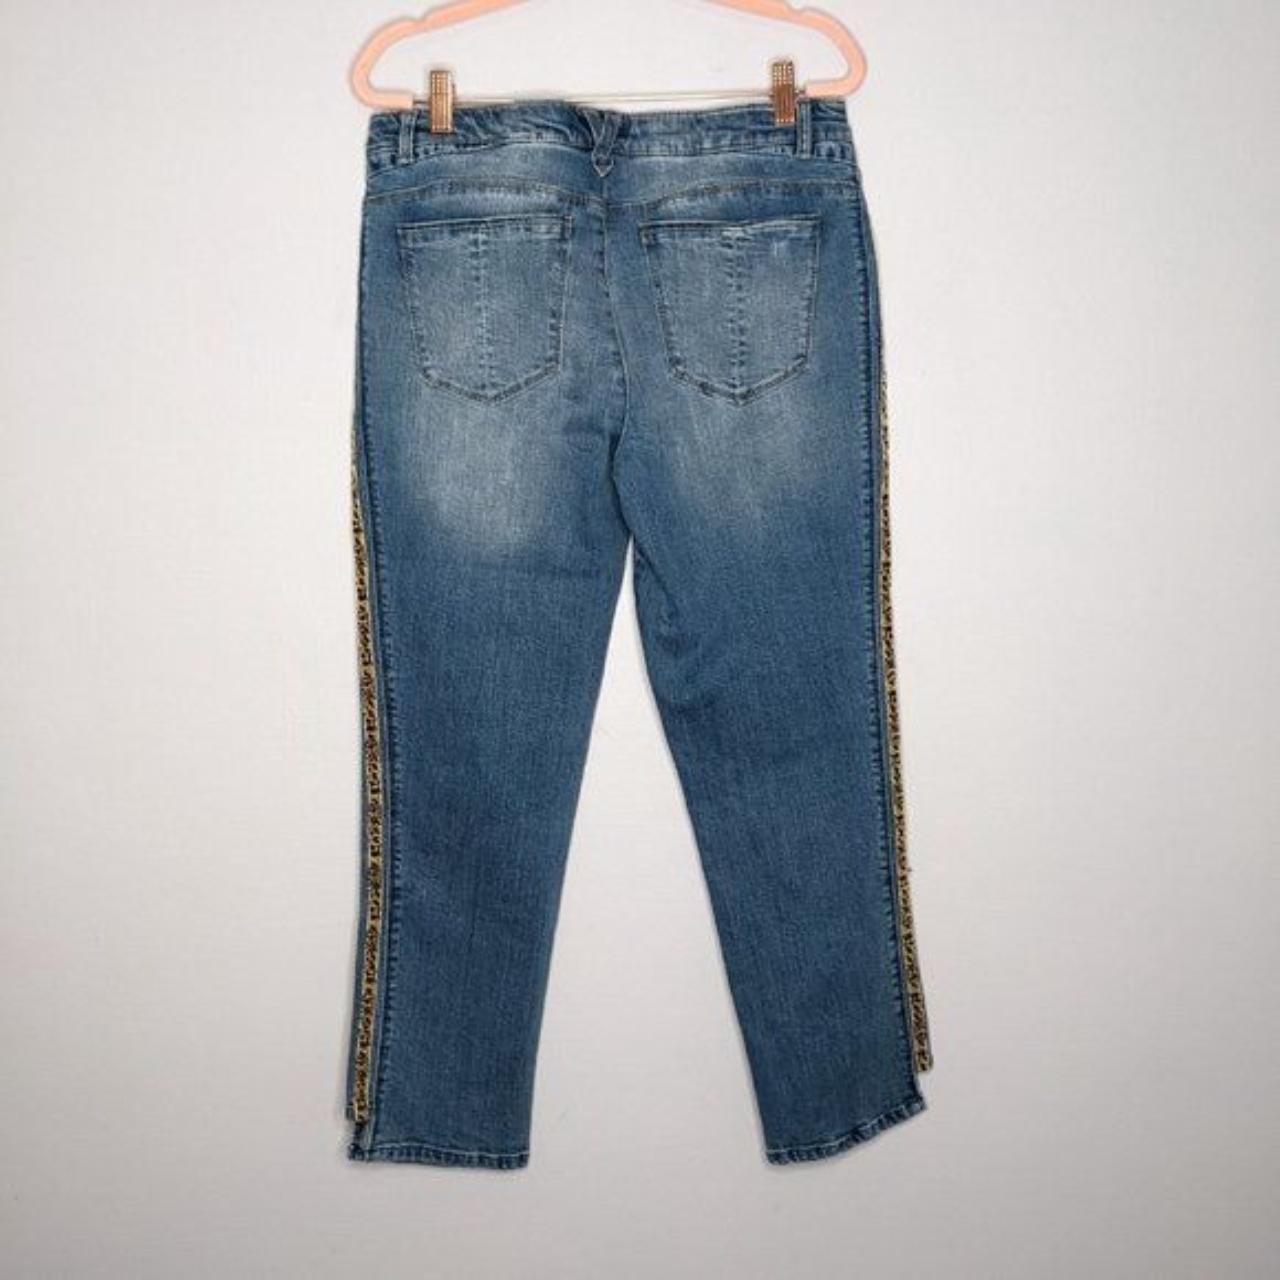 Product Image 3 - Check out these stretch denim